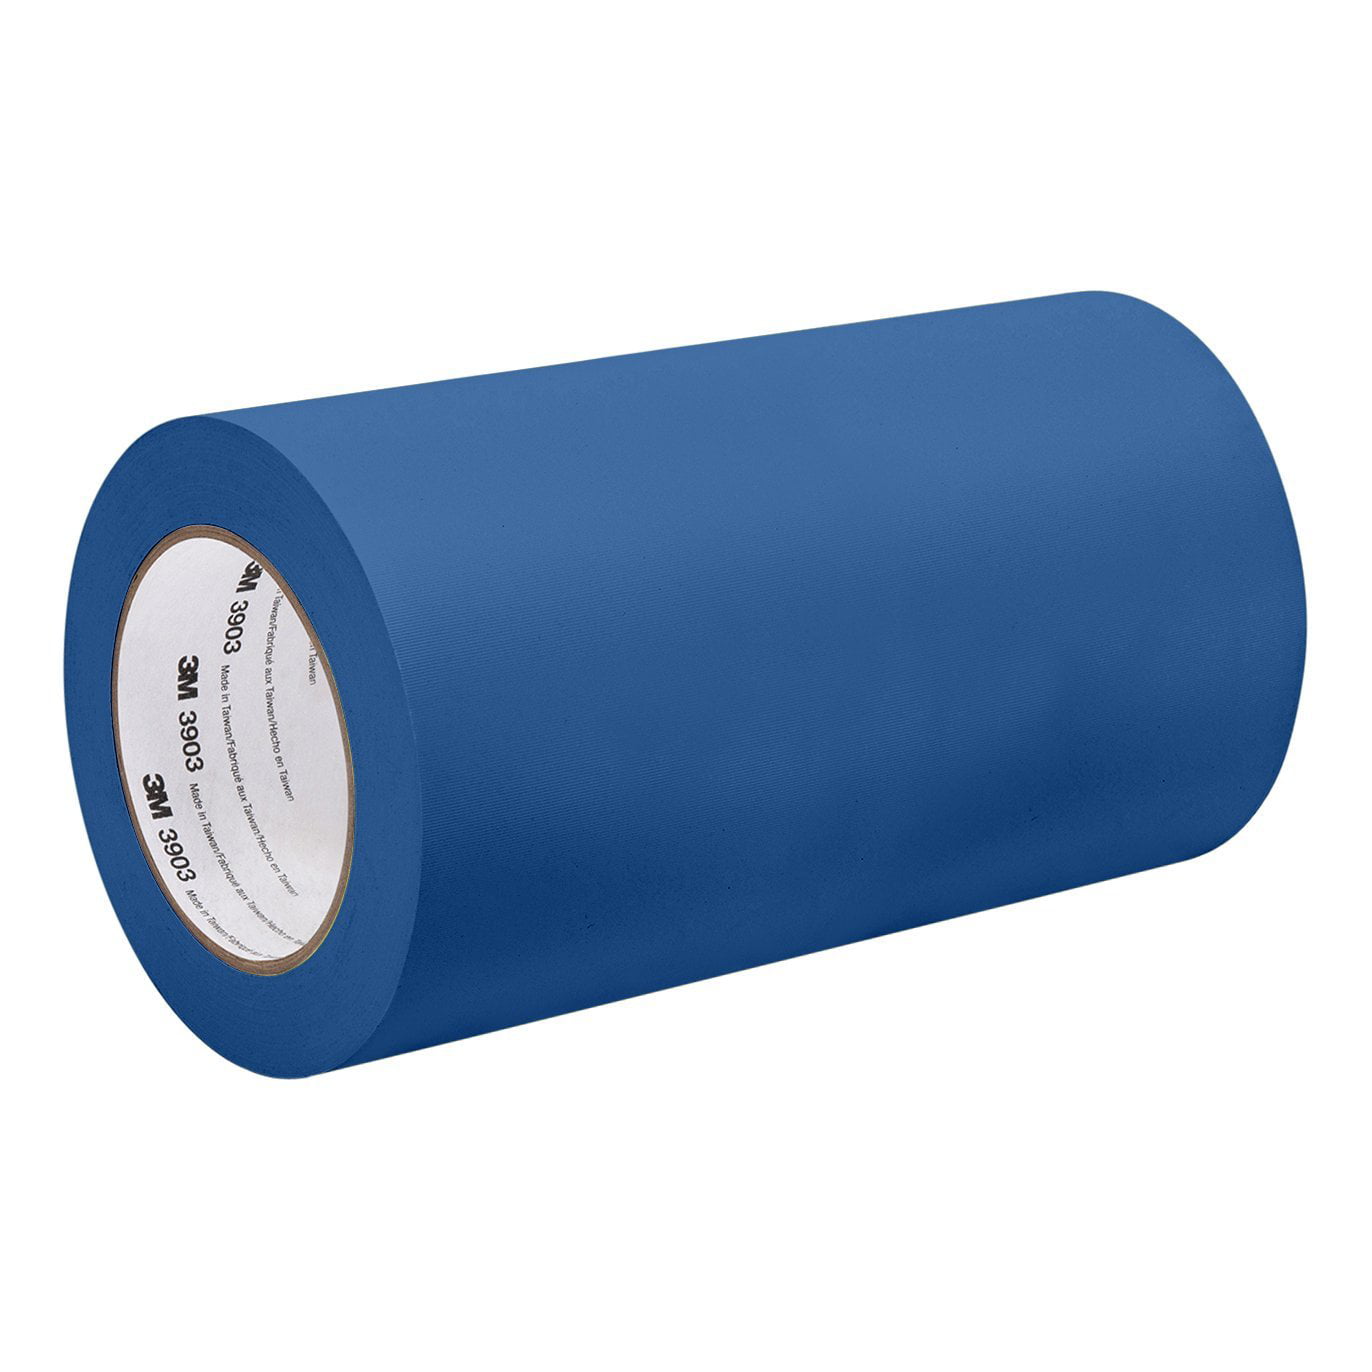 Length 3M Blue Vinyl/Rubber Adhesive Duct Tape 3903 5-50-3903-BLUE 12.6 psi Tensile Strength 50 yd 5 Width 5 Width